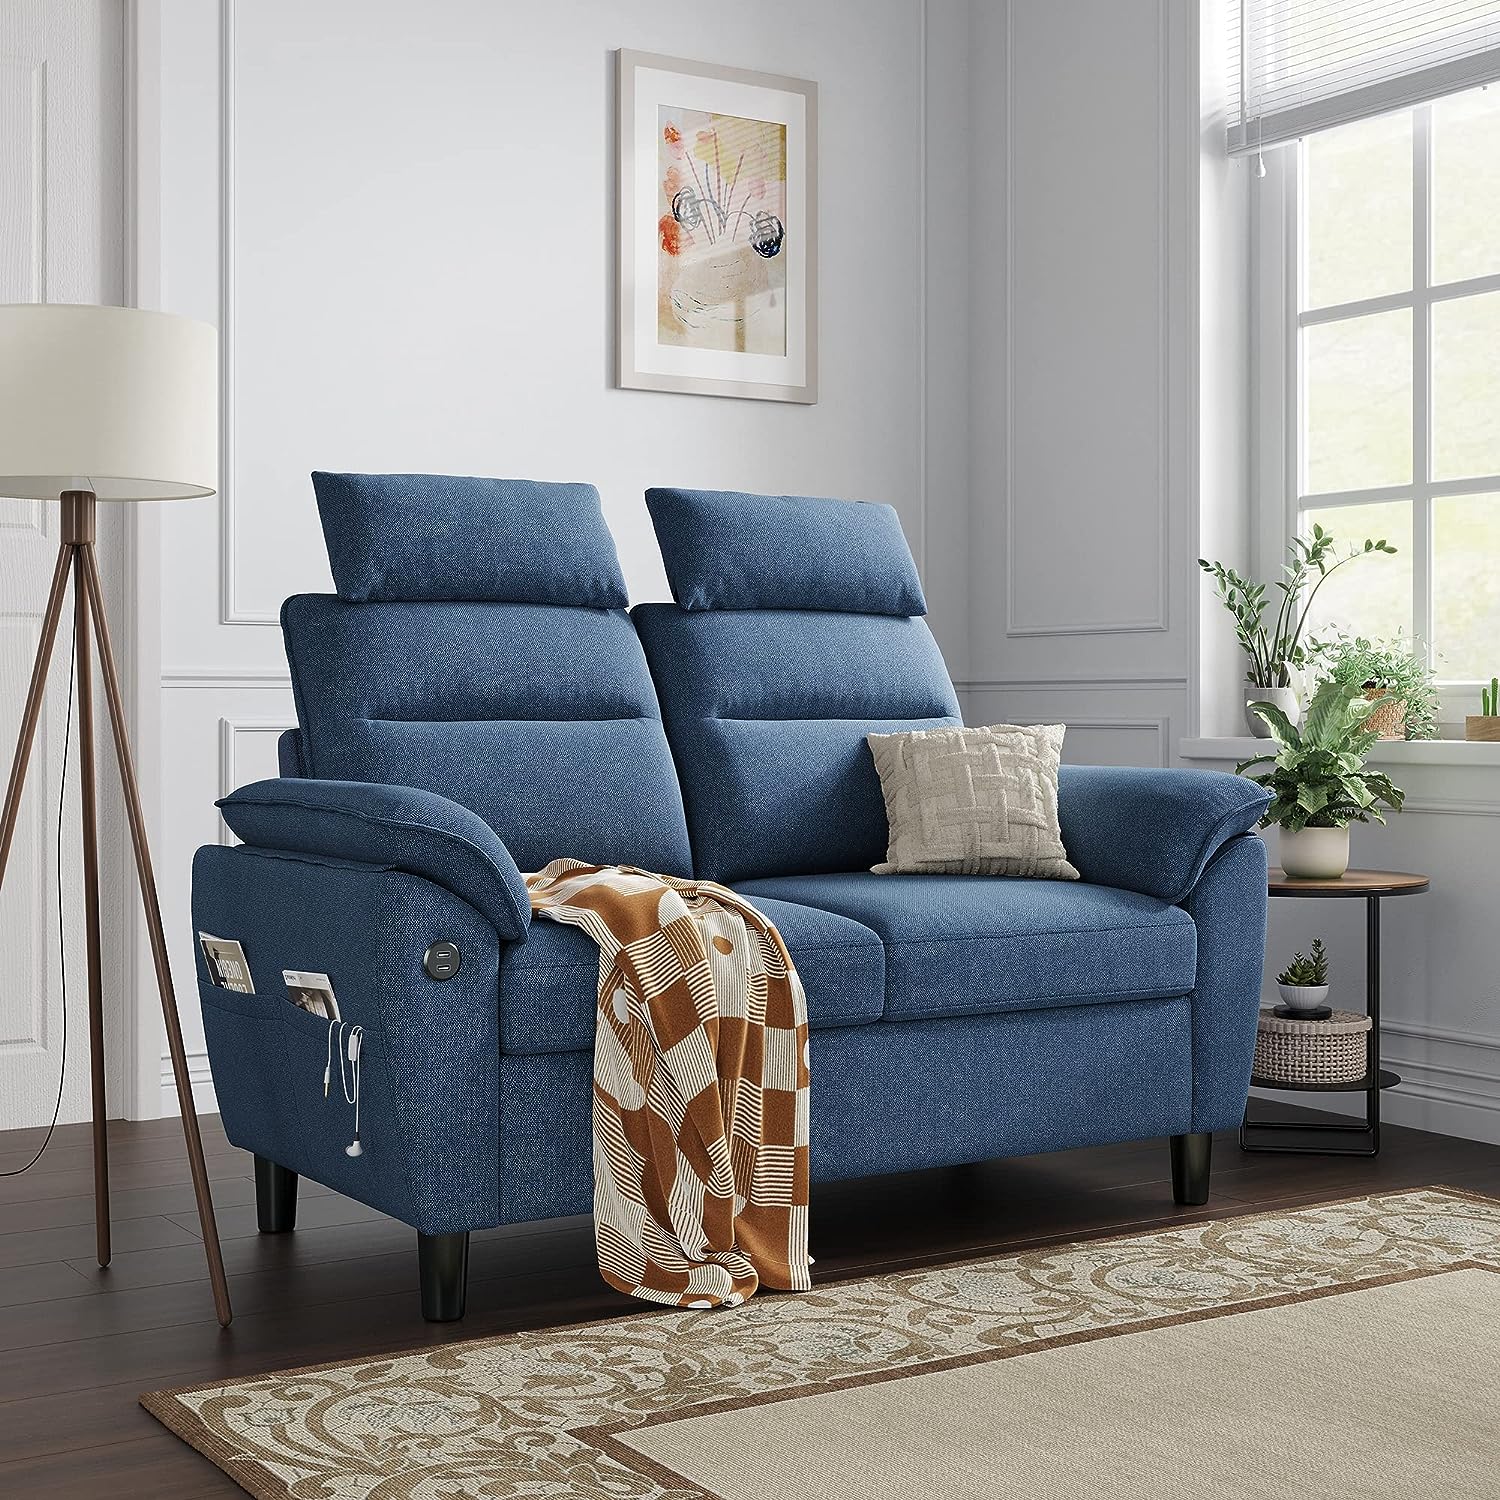 LINSY HOME Loveseat Sofa, Small Sofa with 2 USB [...]